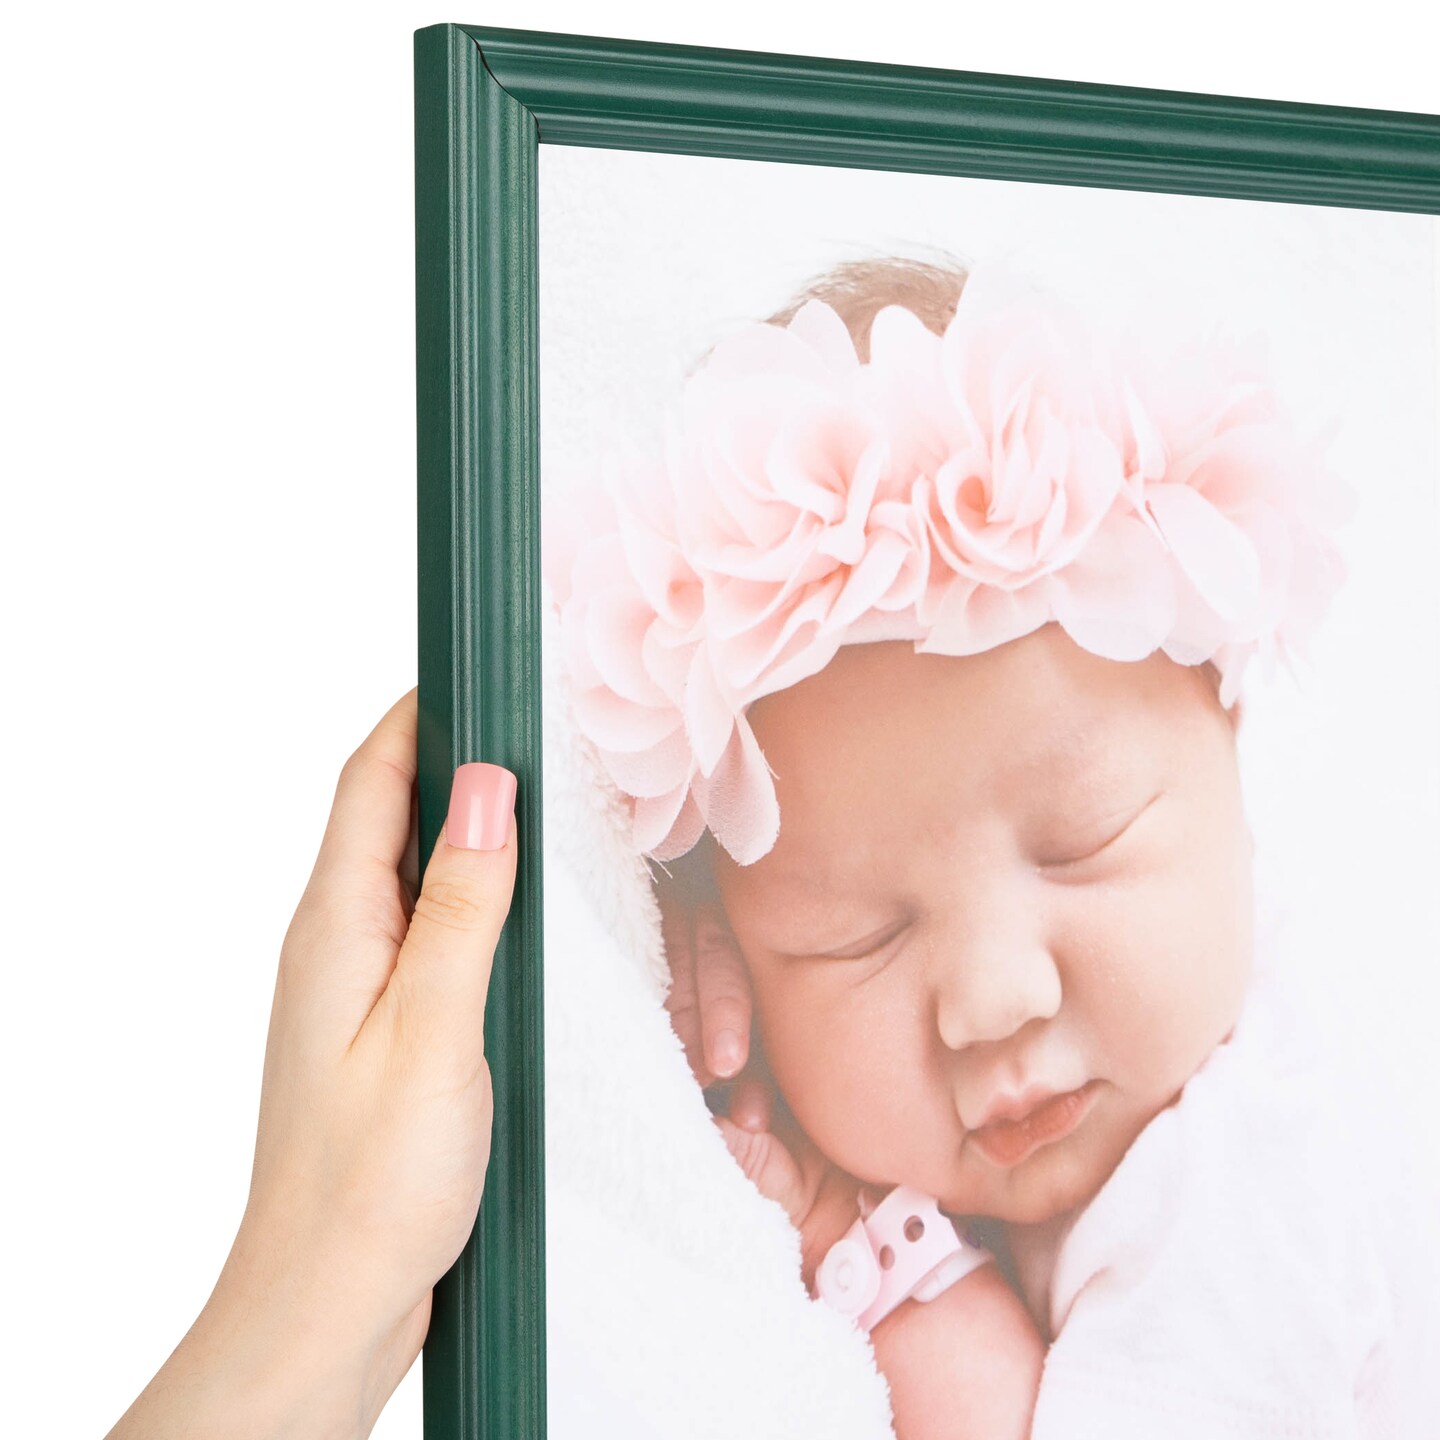 ArtToFrames 15x20 Inch  Picture Frame, This 1 Inch Custom Wood Poster Frame is Available in Multiple Colors, Great for Your Art or Photos - Comes with Regular Glass and  Corrugated Backing (A9LB)